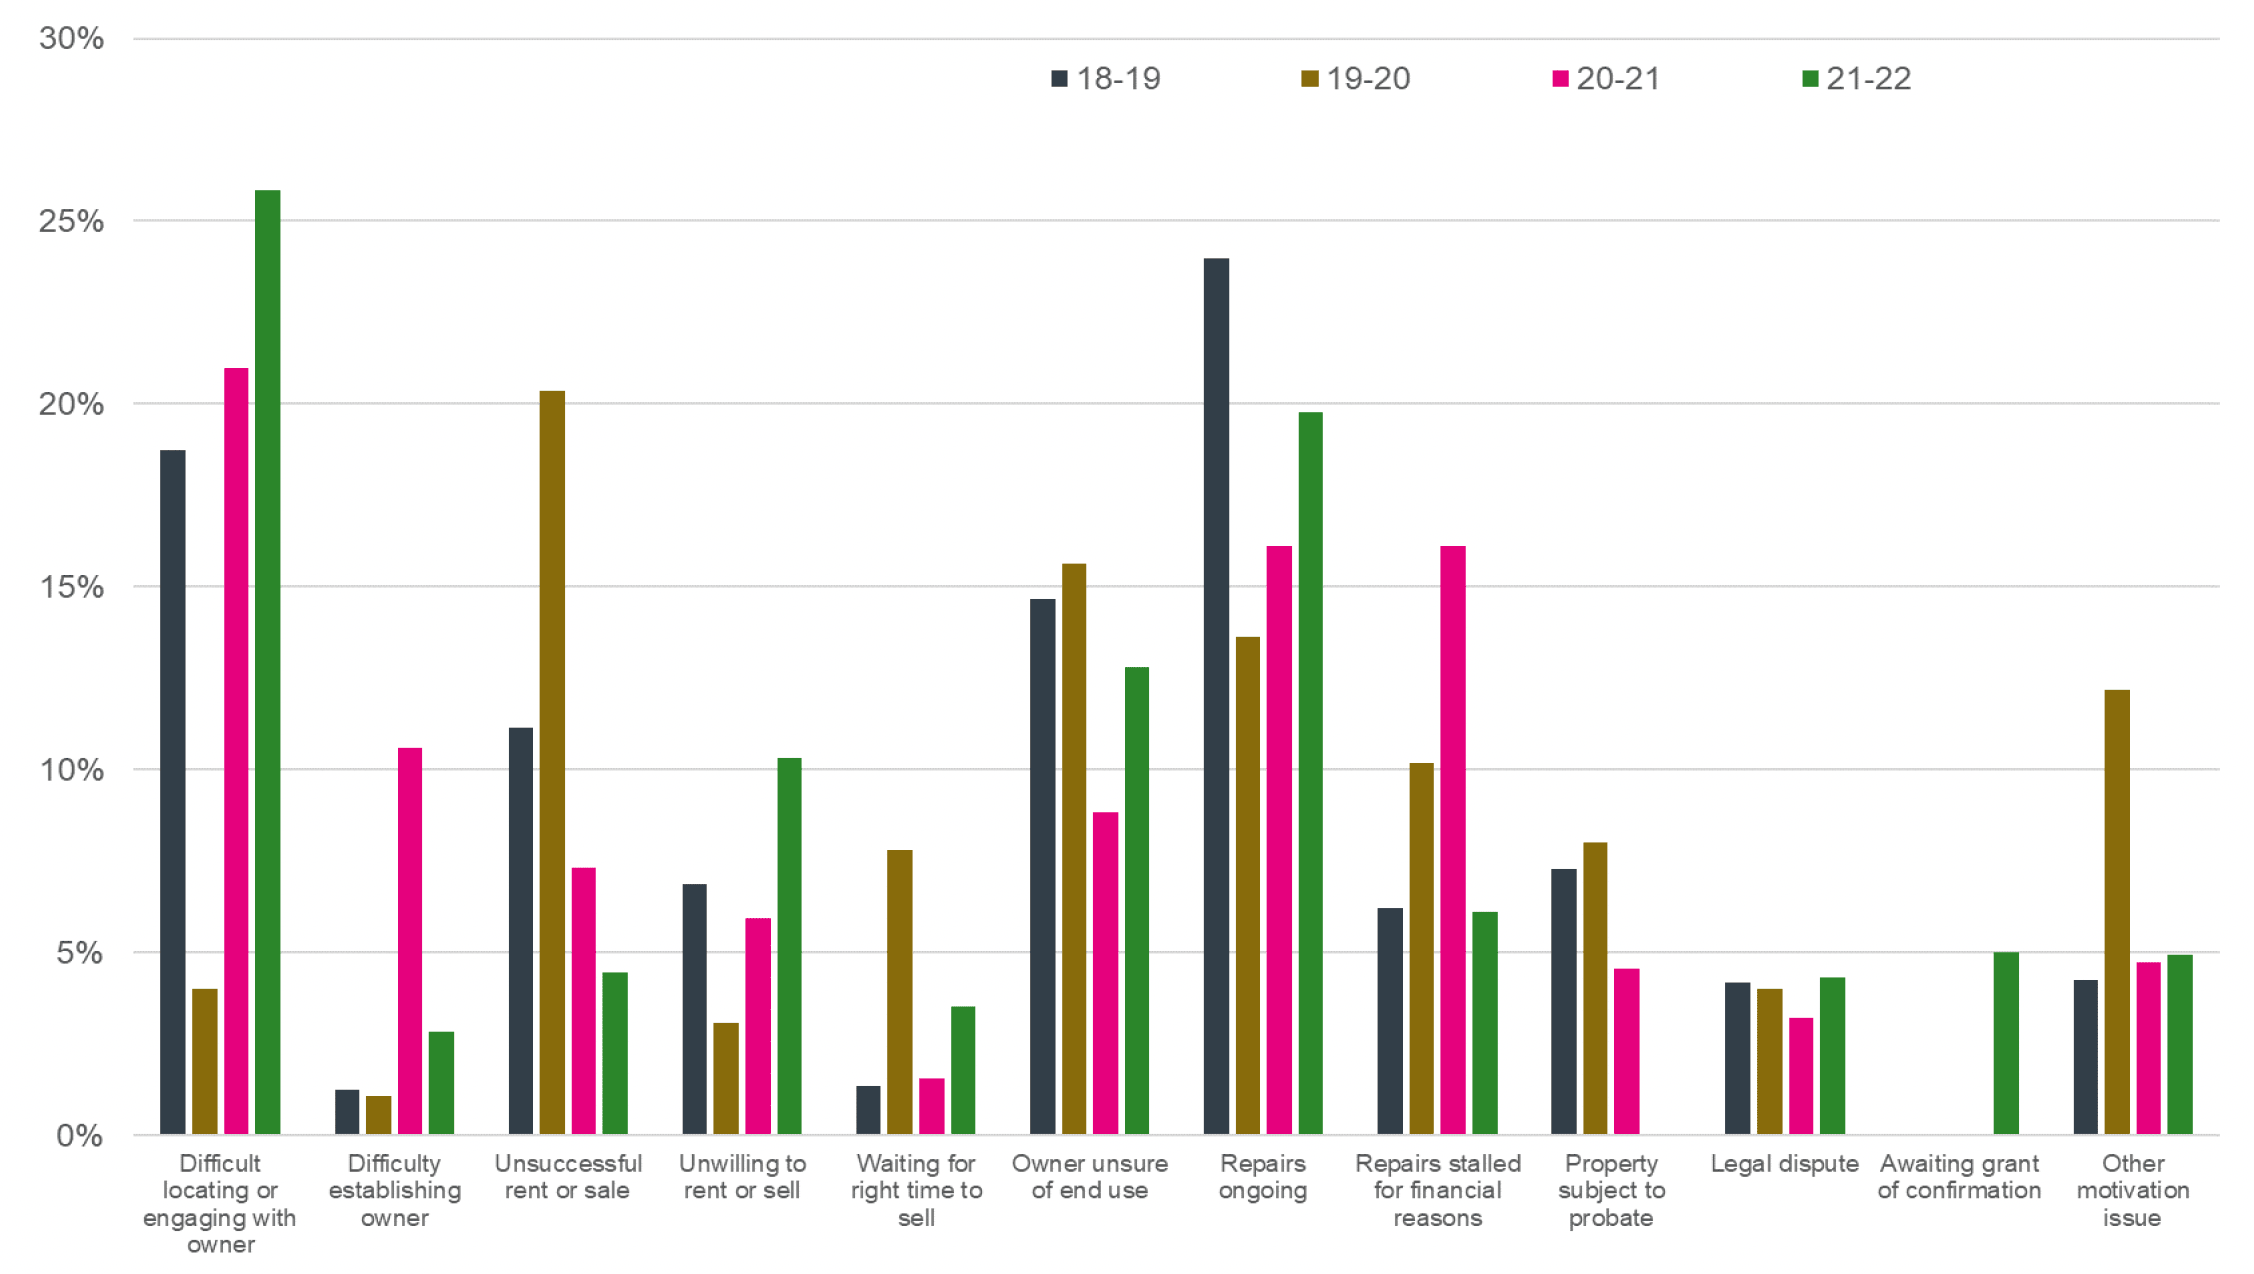 A vertical clustered bar chart showing the reasons why properties remain empty for the periods 2018-19, 2019-20, 2020-21 and 2021-22. The chart presents twelve different reasons why properties remain empty and which proportion  of homes were empty for each reason in a given period.